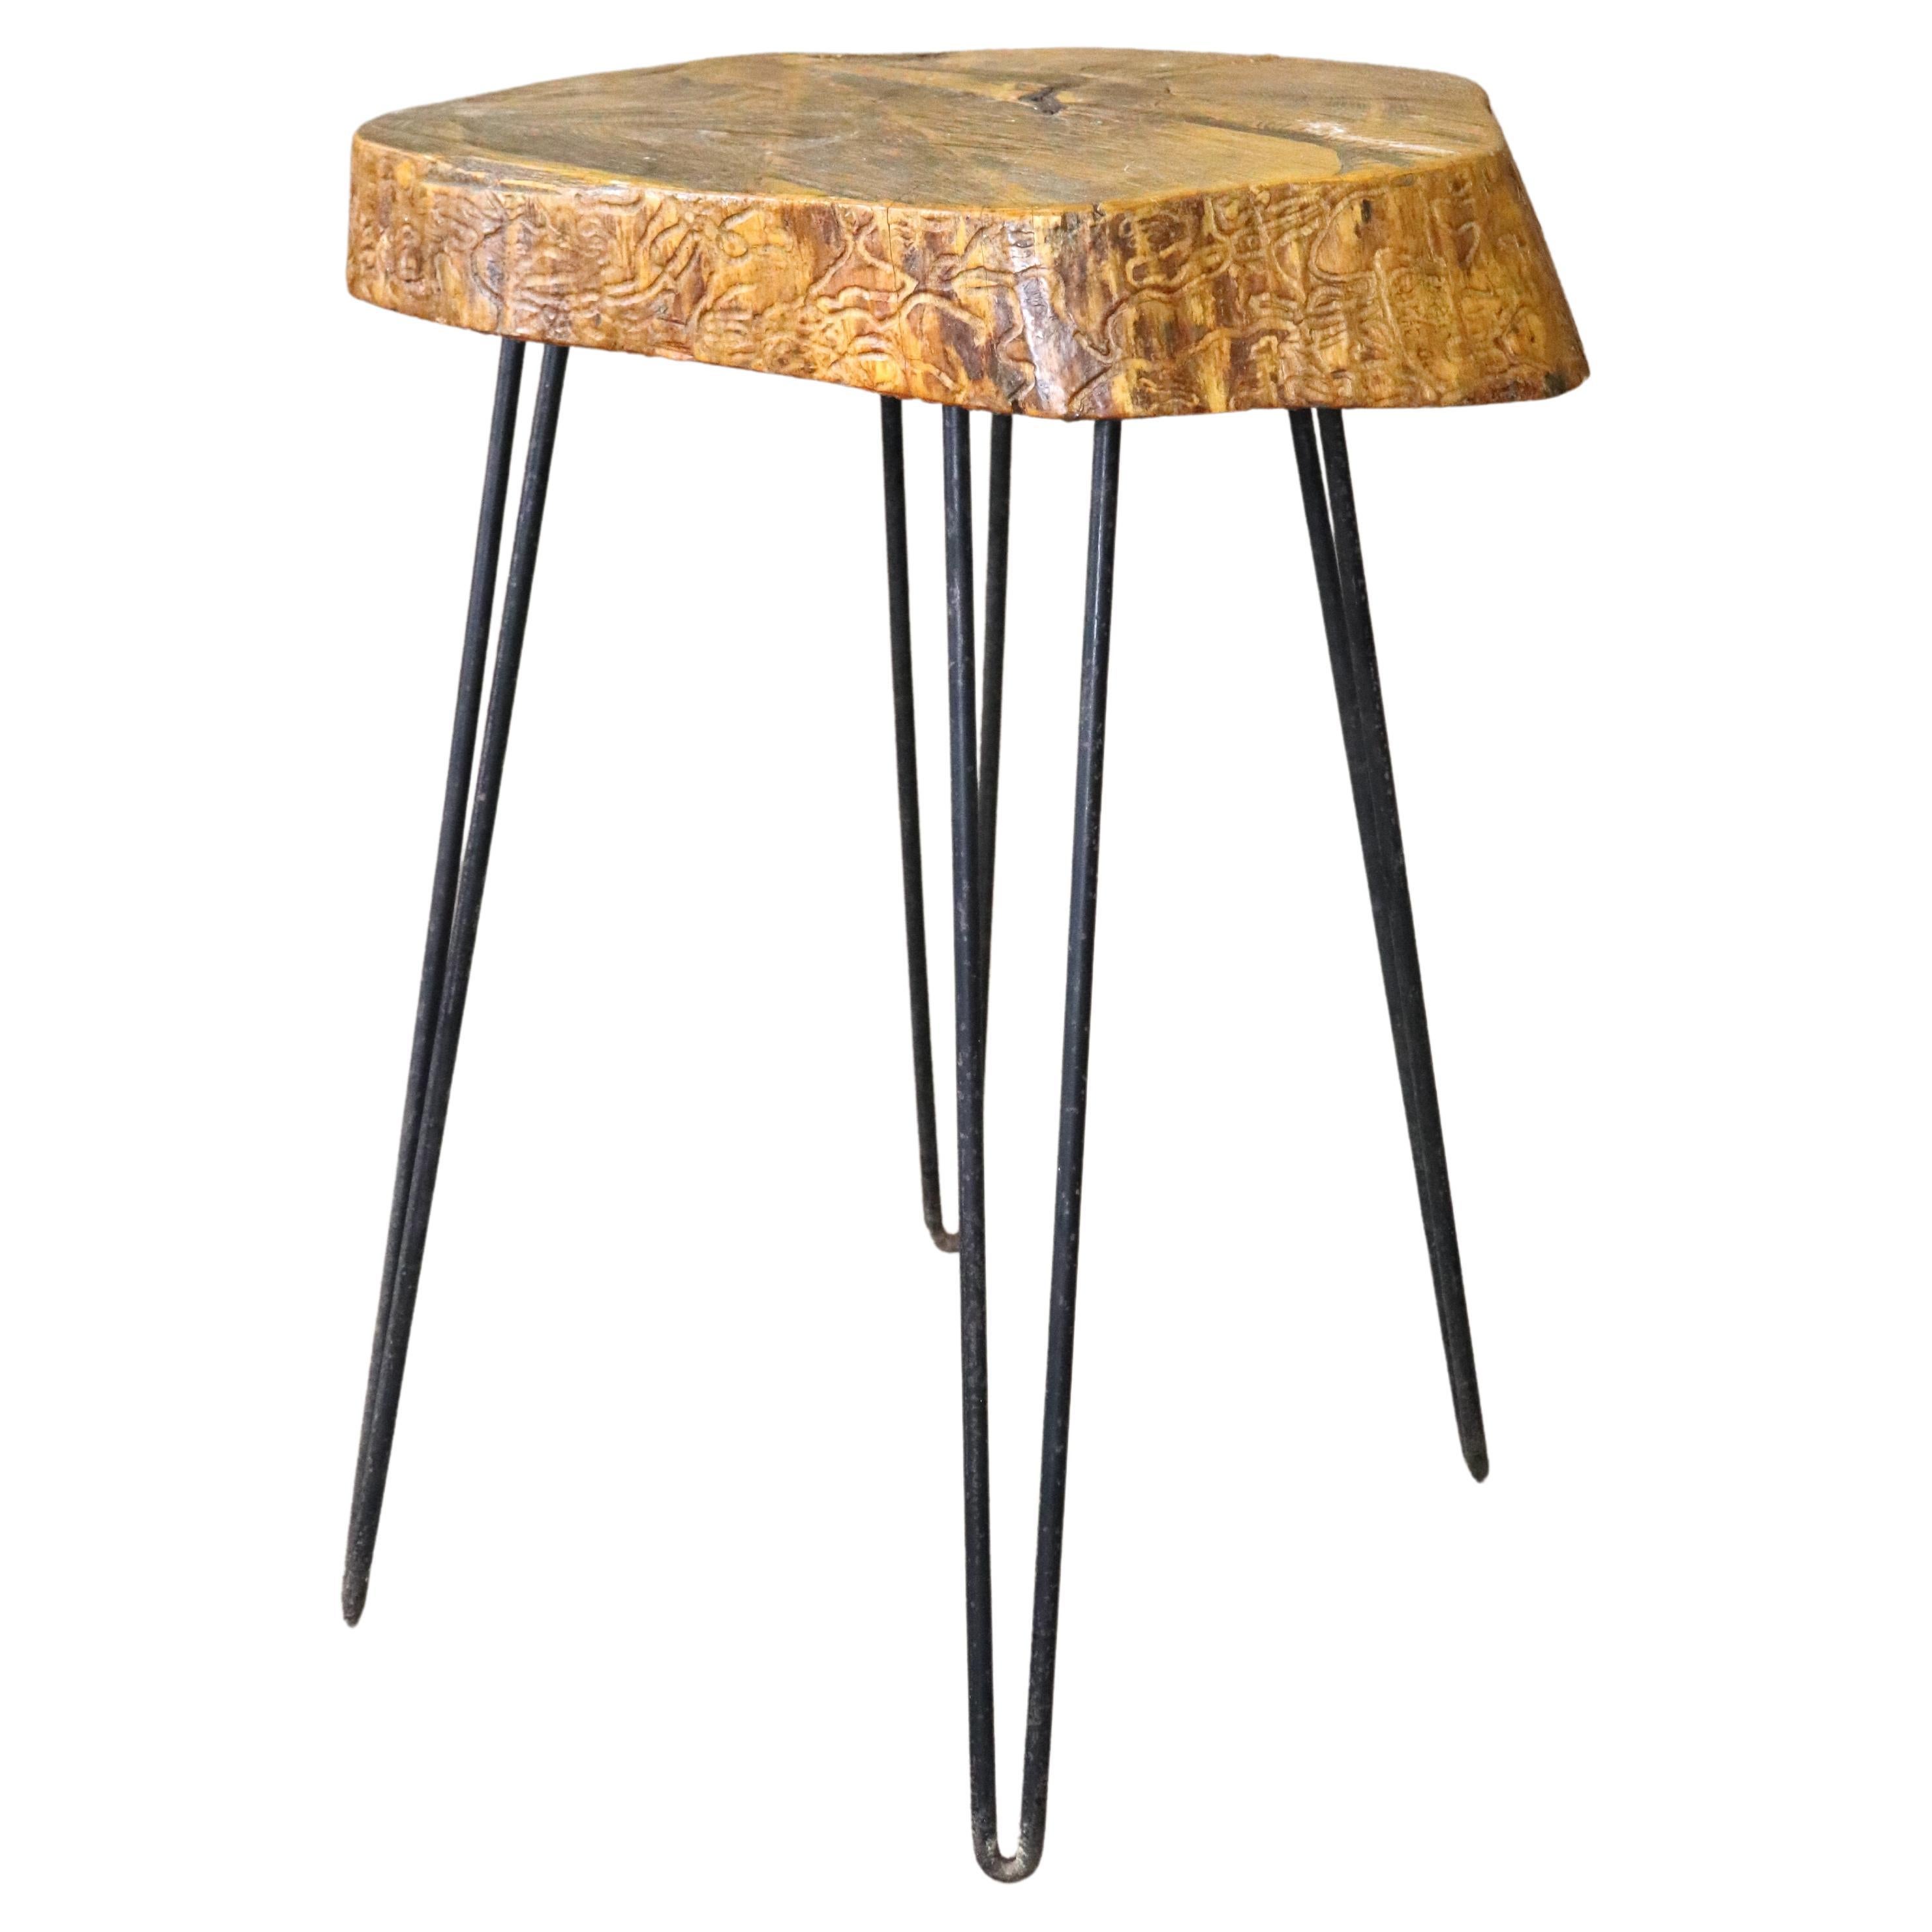 Reclaimed Wood Side Tables For Sale